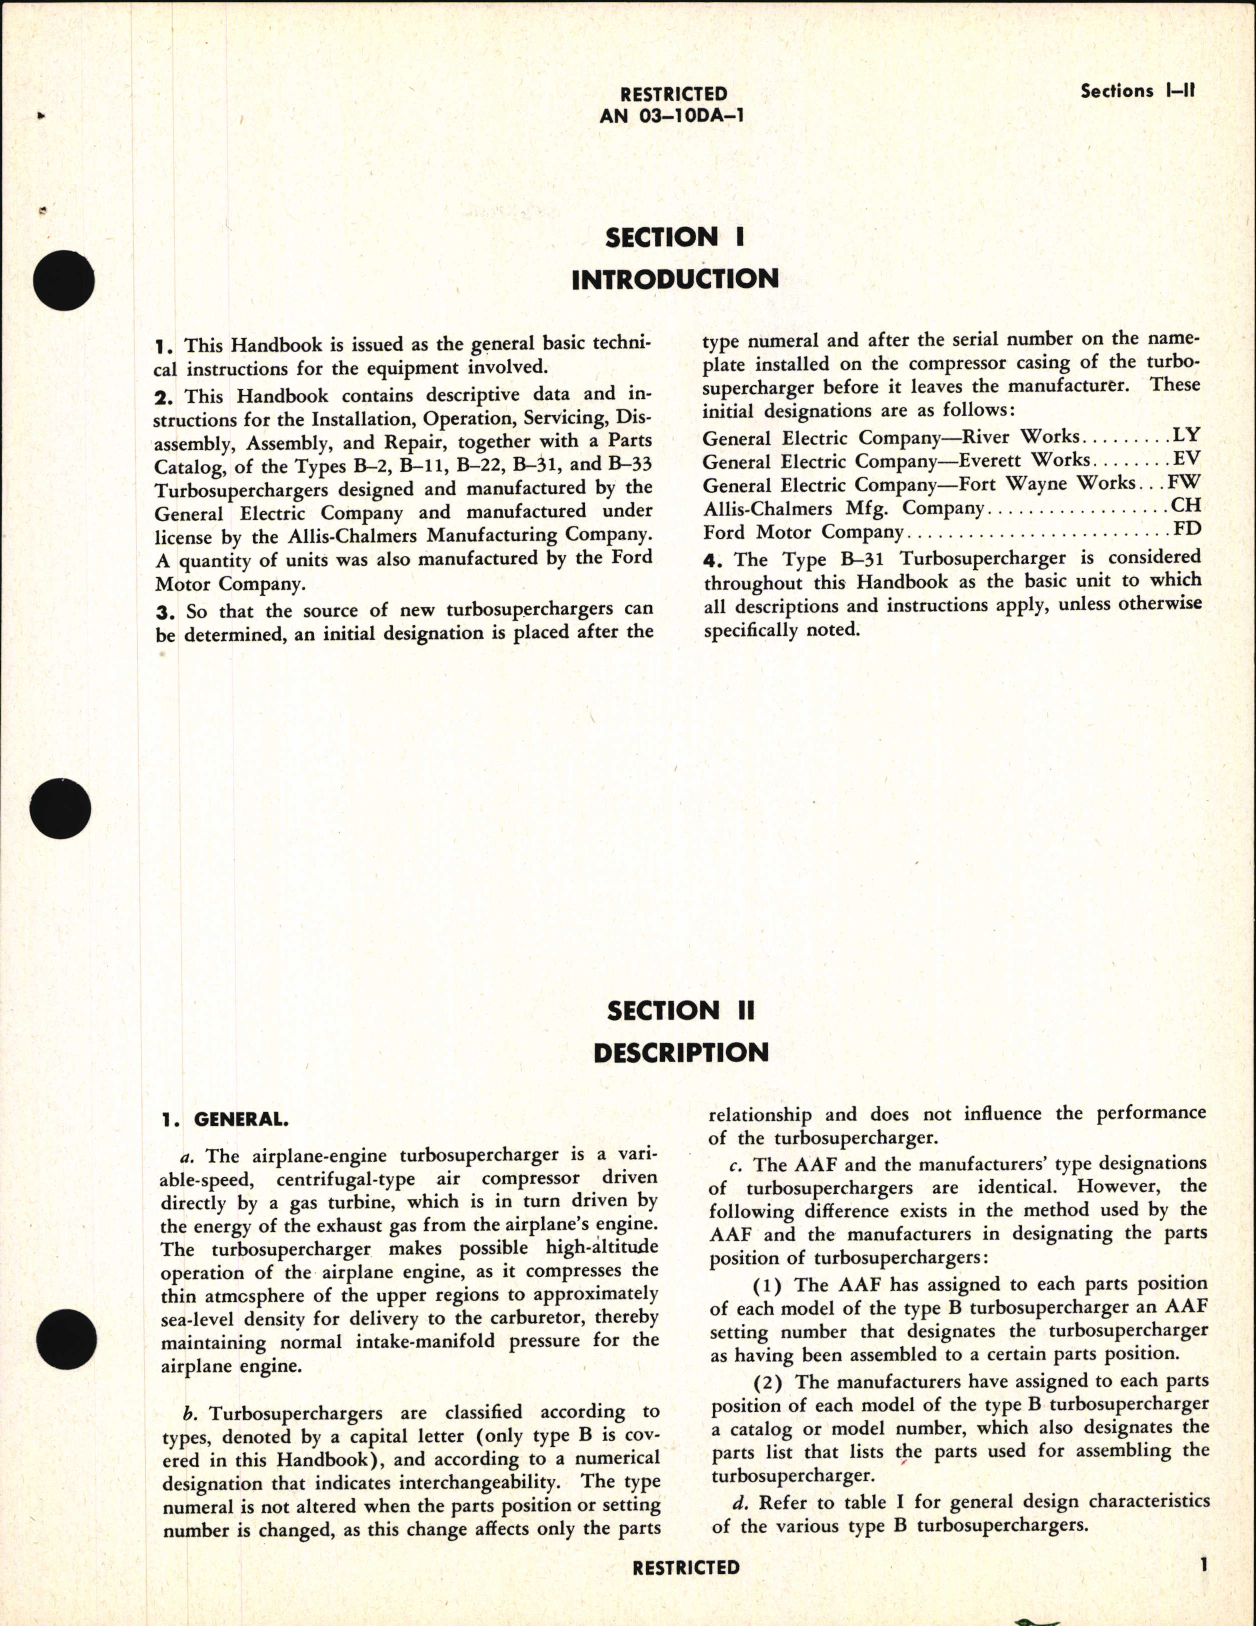 Sample page 7 from AirCorps Library document: Operation, Service, & Overhaul Instructions with Parts Catalog for Turbosuperchargers Types B-2, B-11, B-22, B-31, and B-33